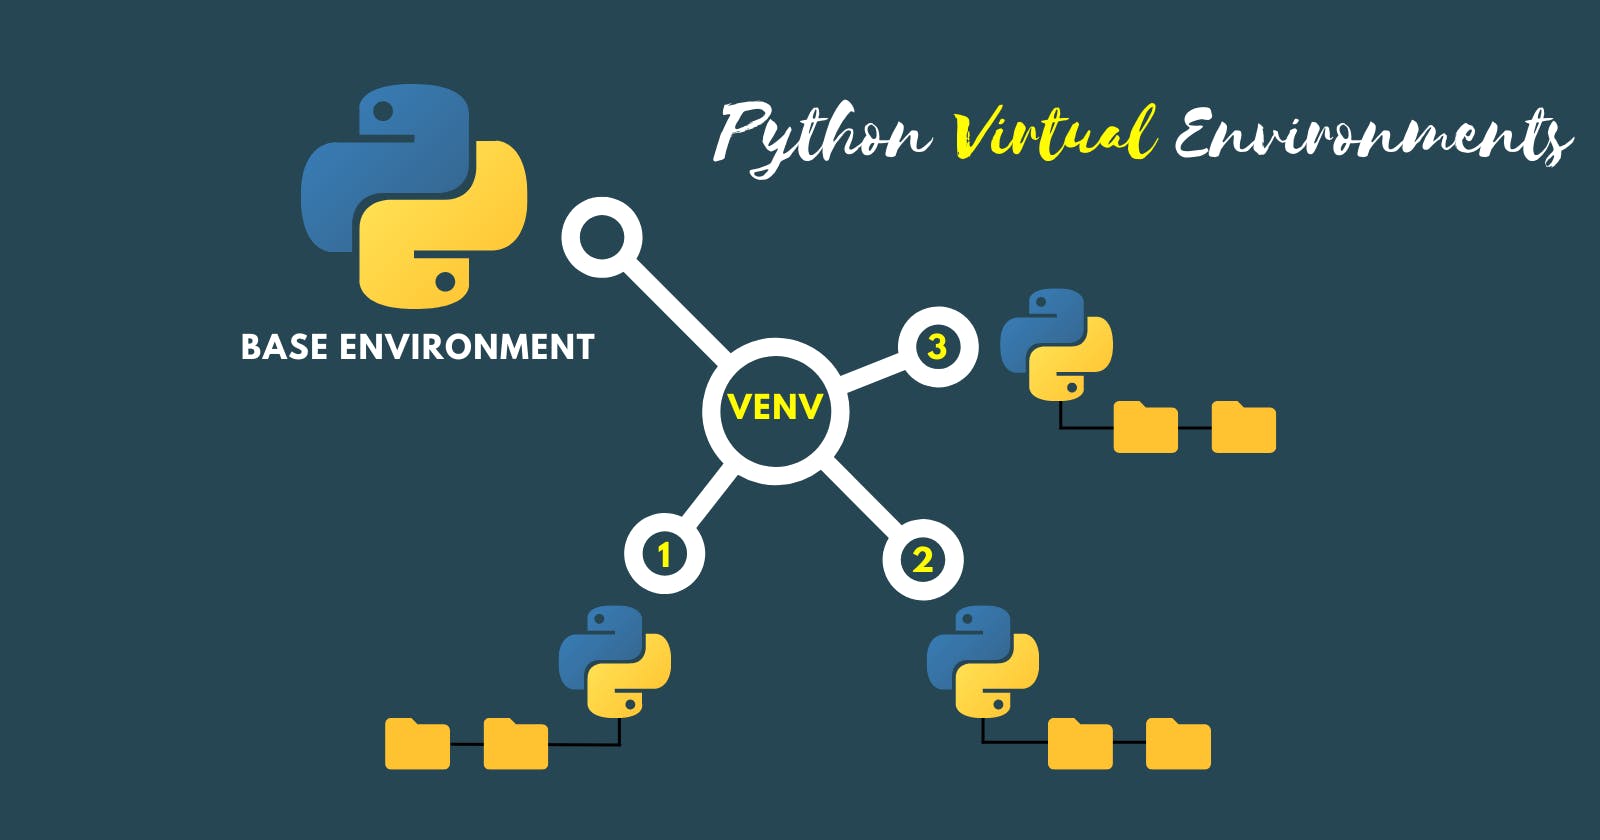 Python Virtual Environments [VENV] - What Is It and How To Set Up